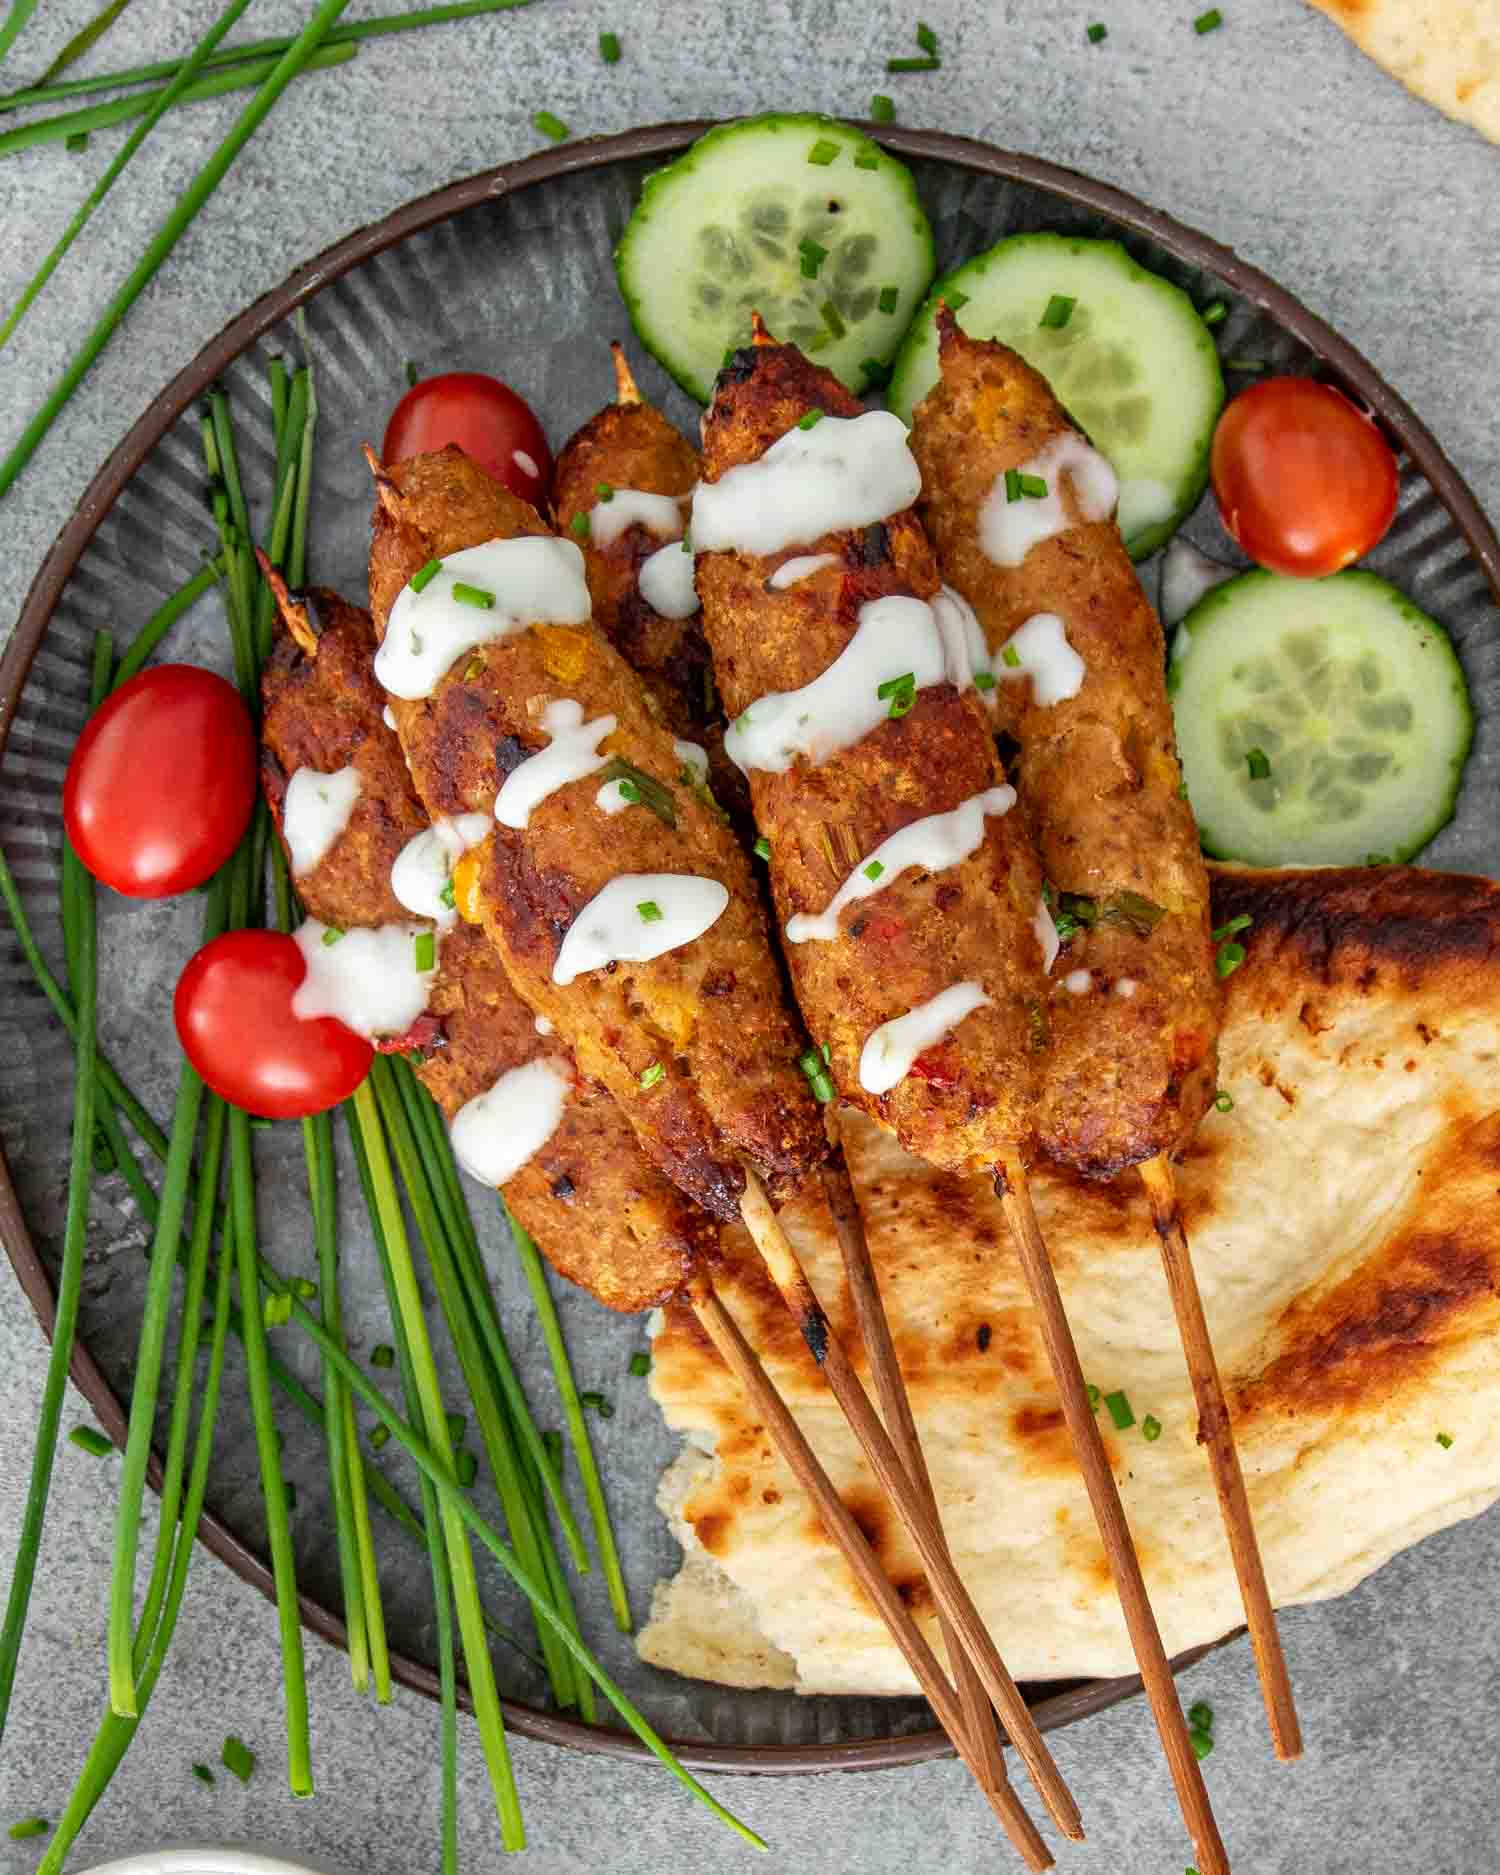 chicken kebabs drizzled with tzatziki sauce on a plate alongside some pita bread and cucumbers.